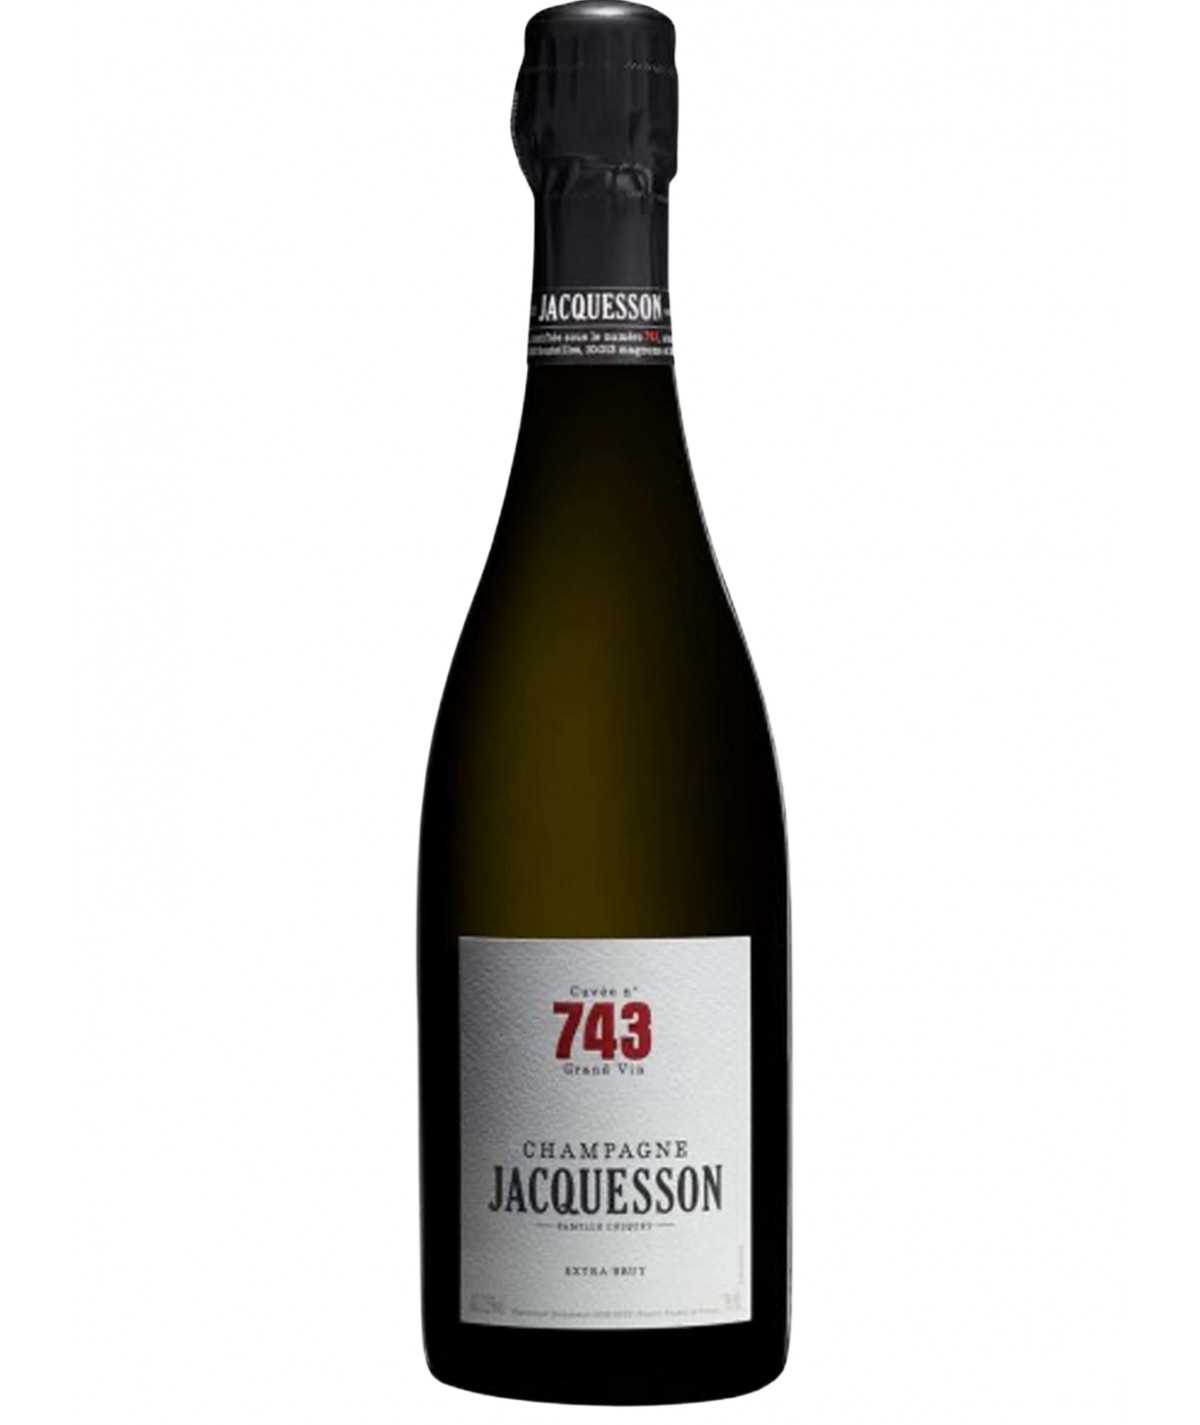 Magnum of JACQUESSON Champagne 743